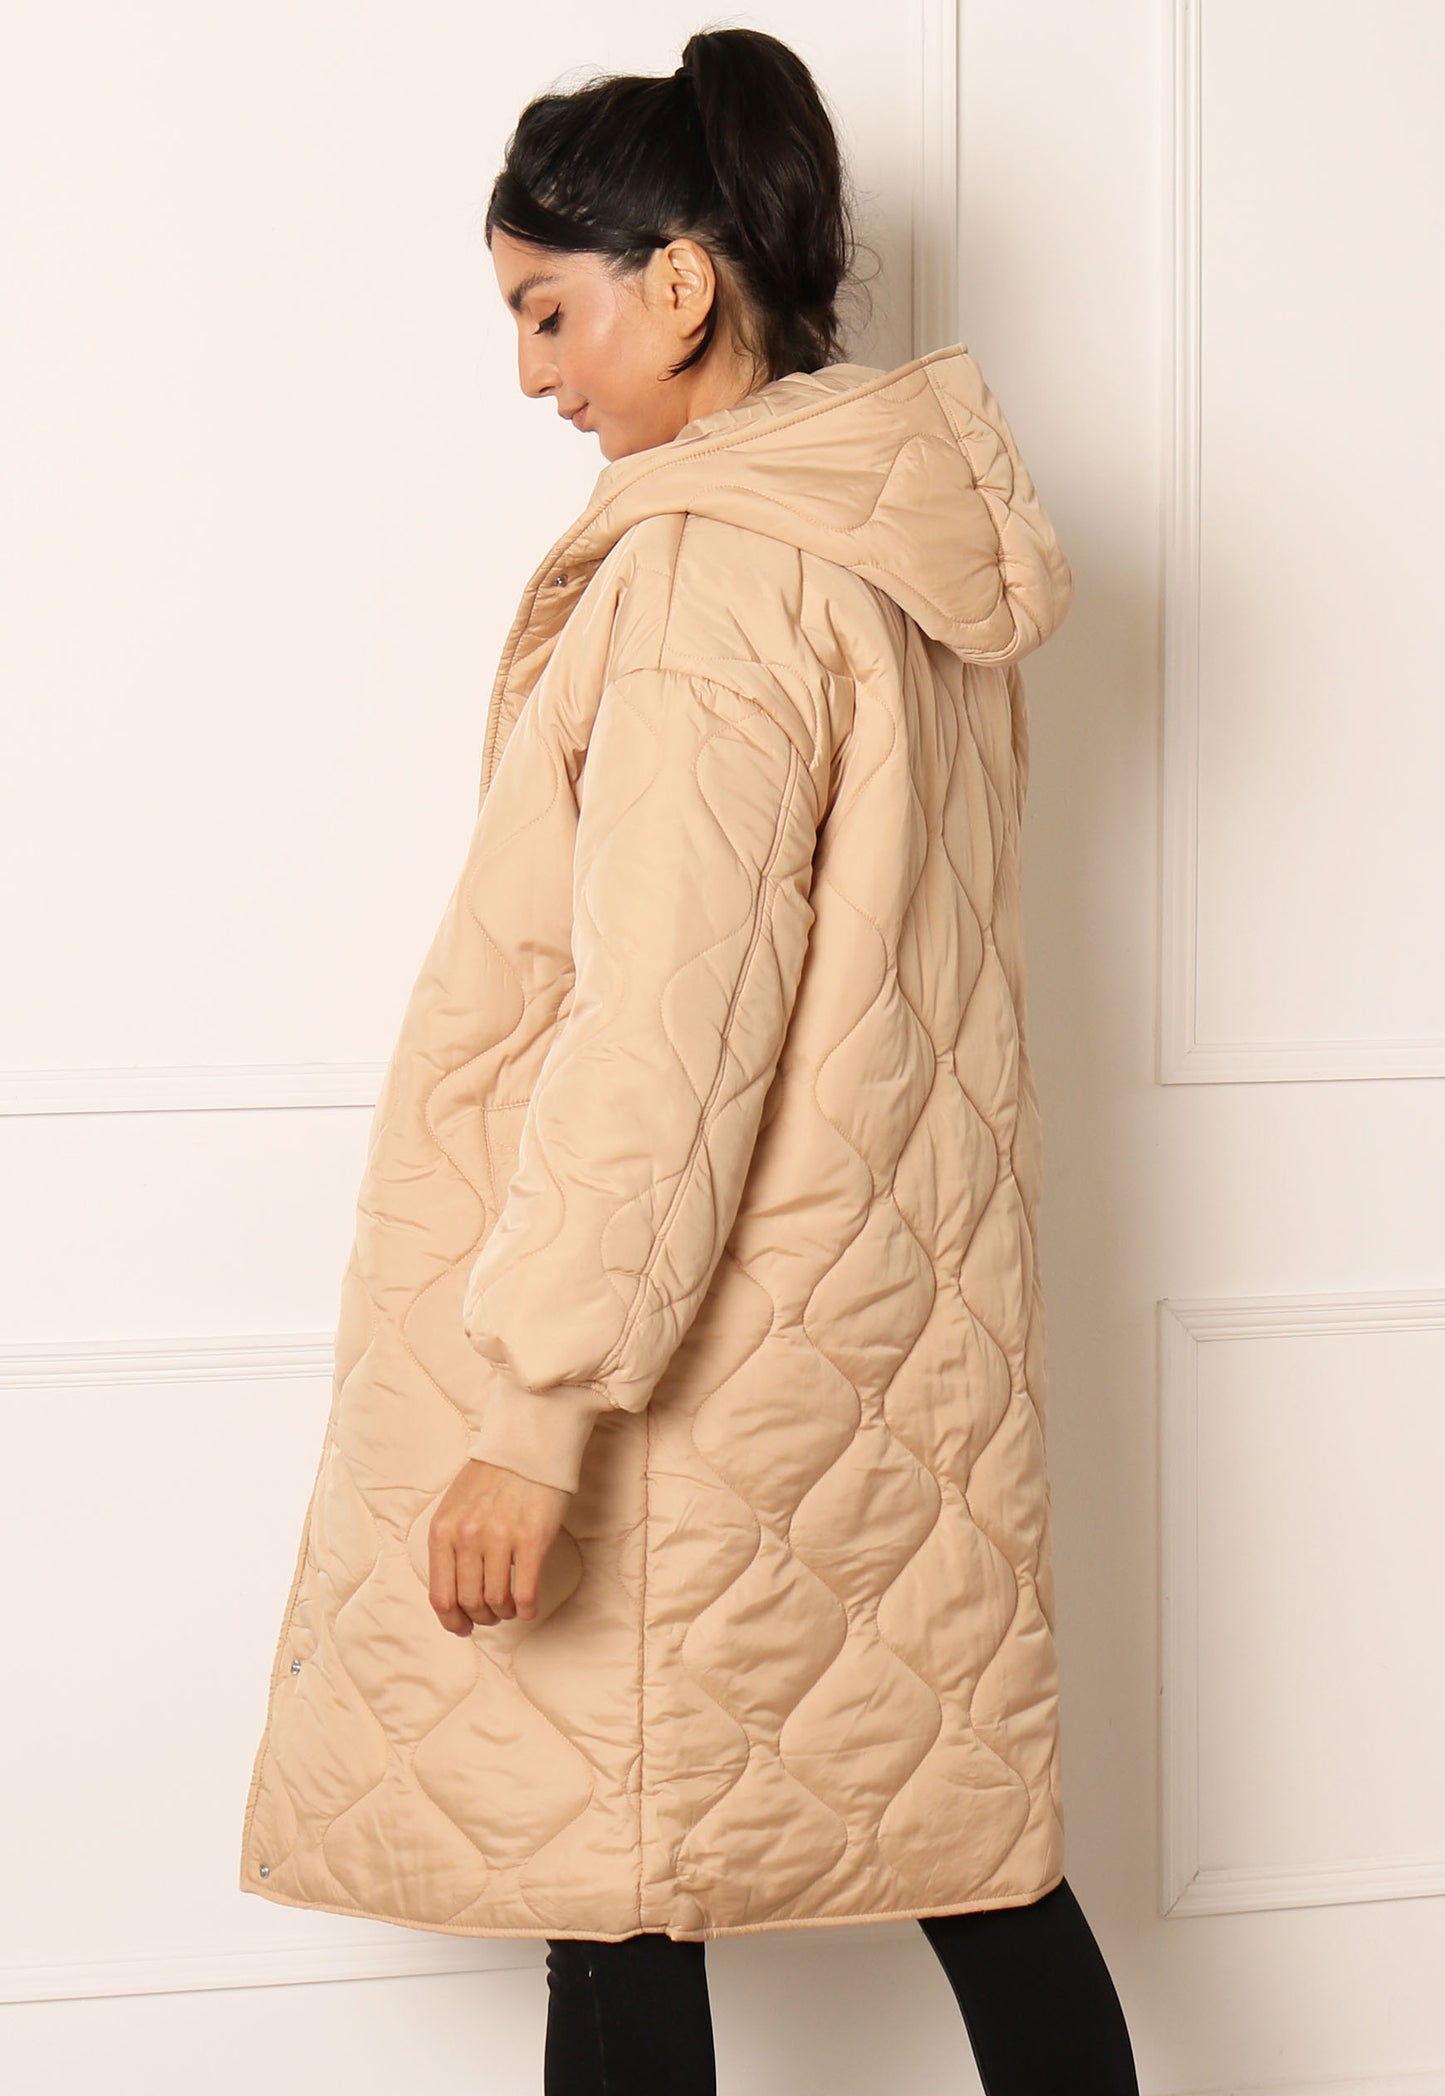 VILA Thora Onion Quilted Midi Coat with Hood in Beige - concretebartops